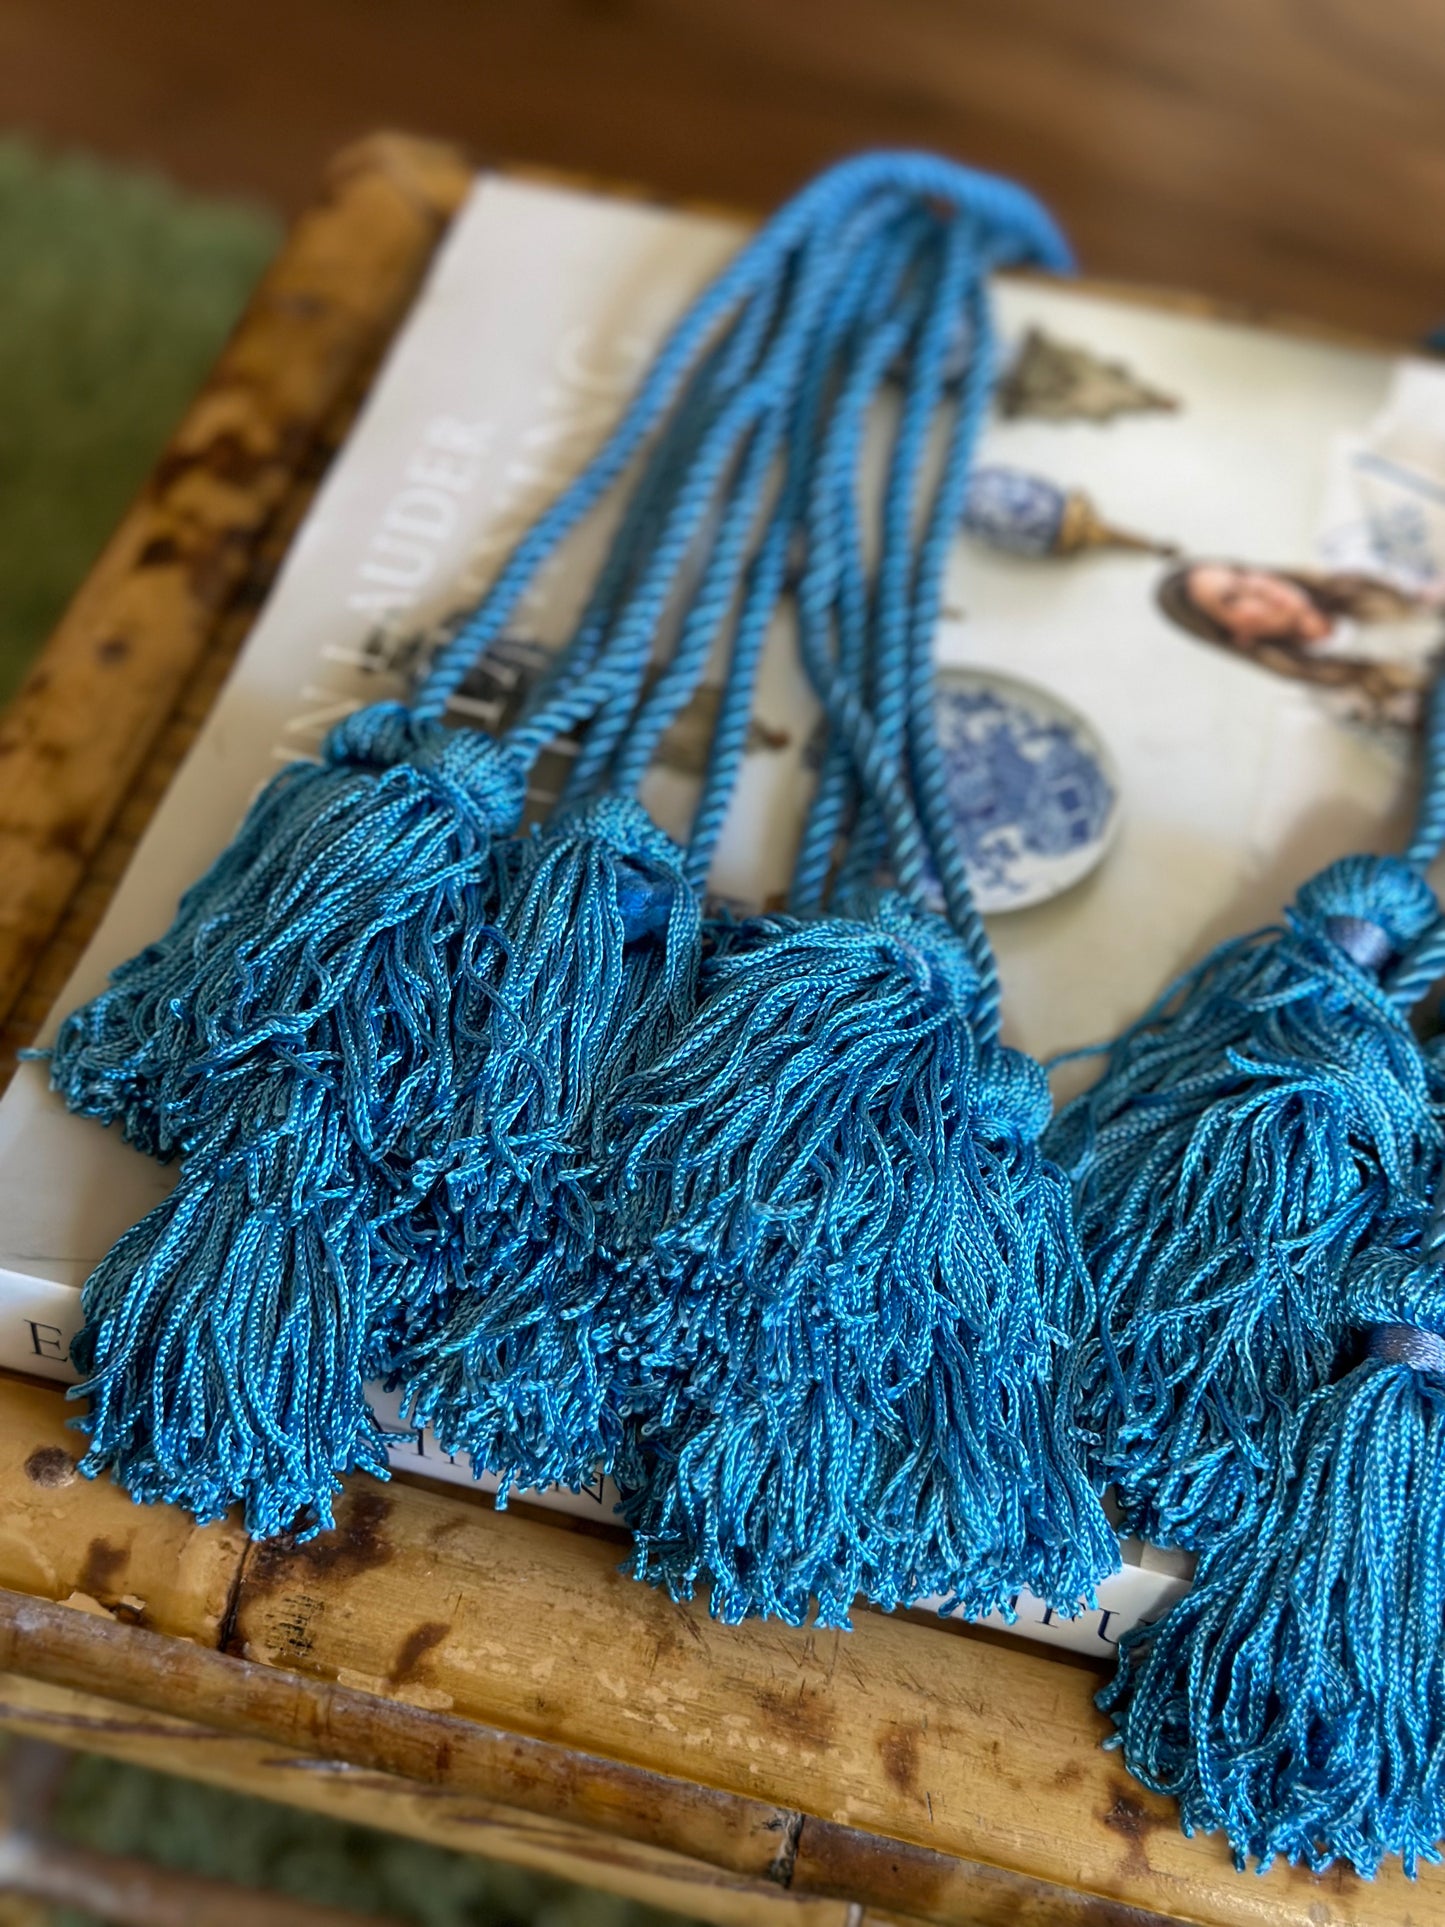 Vintage French Blue Tassels, 30 inches long - Pristine!